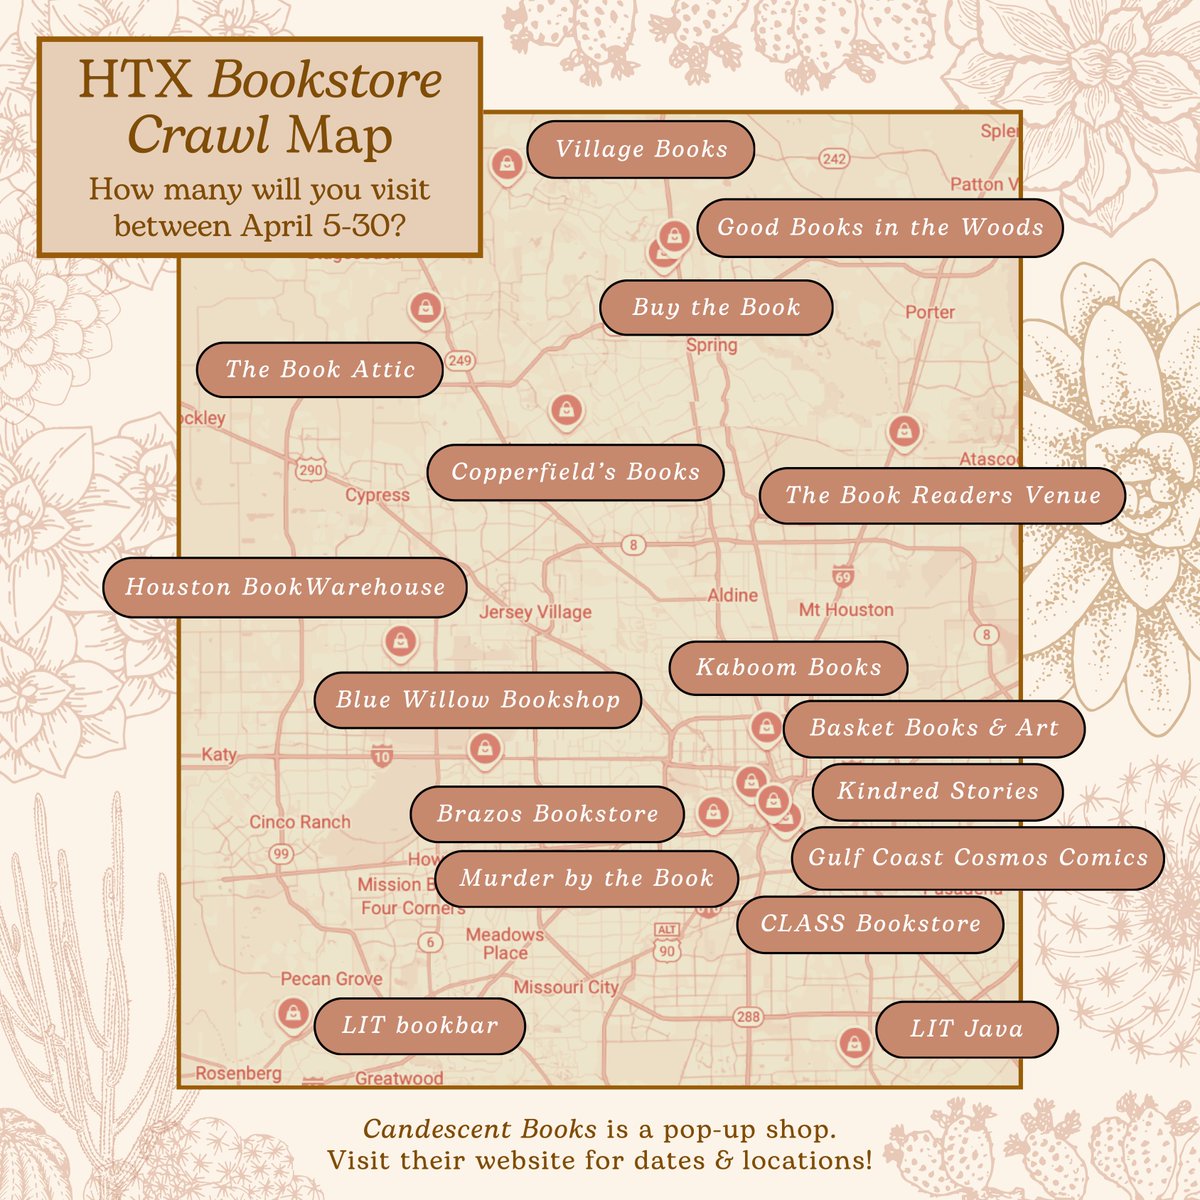 ✨The Houston Bookstore Crawl is happening now!✨ How many of the 18 participating Houston-area indie bookshops have you visited so far? 😍 Visit our website for all the #HTXBookCrawl24 details: bluewillowbookshop.com/HTXBookCrawl24